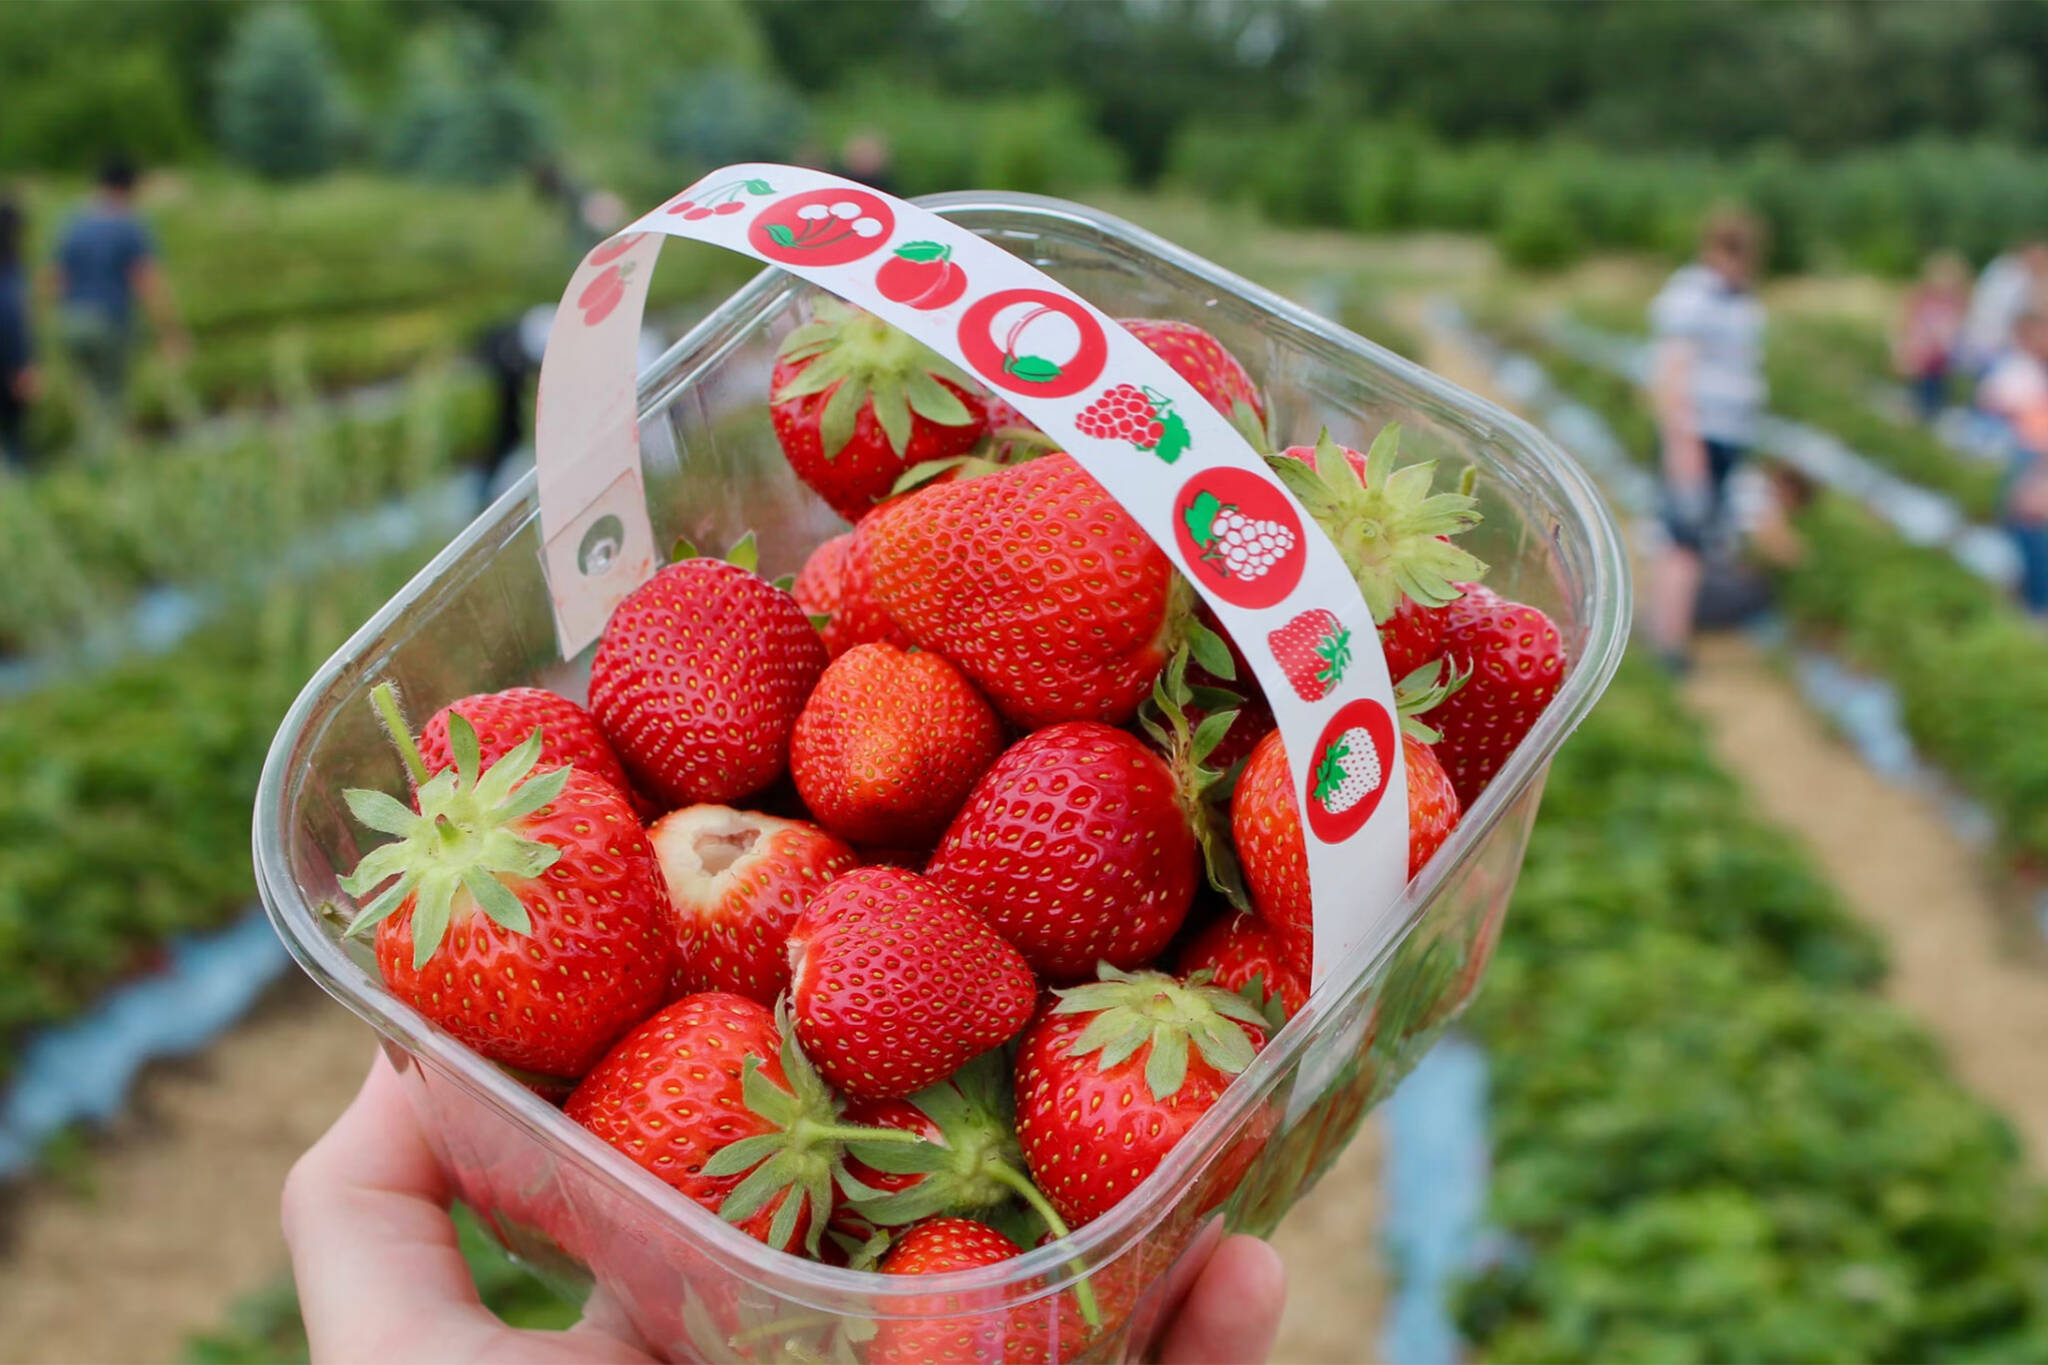 Pickyourown strawberries at Ontario farms opens for the season next month